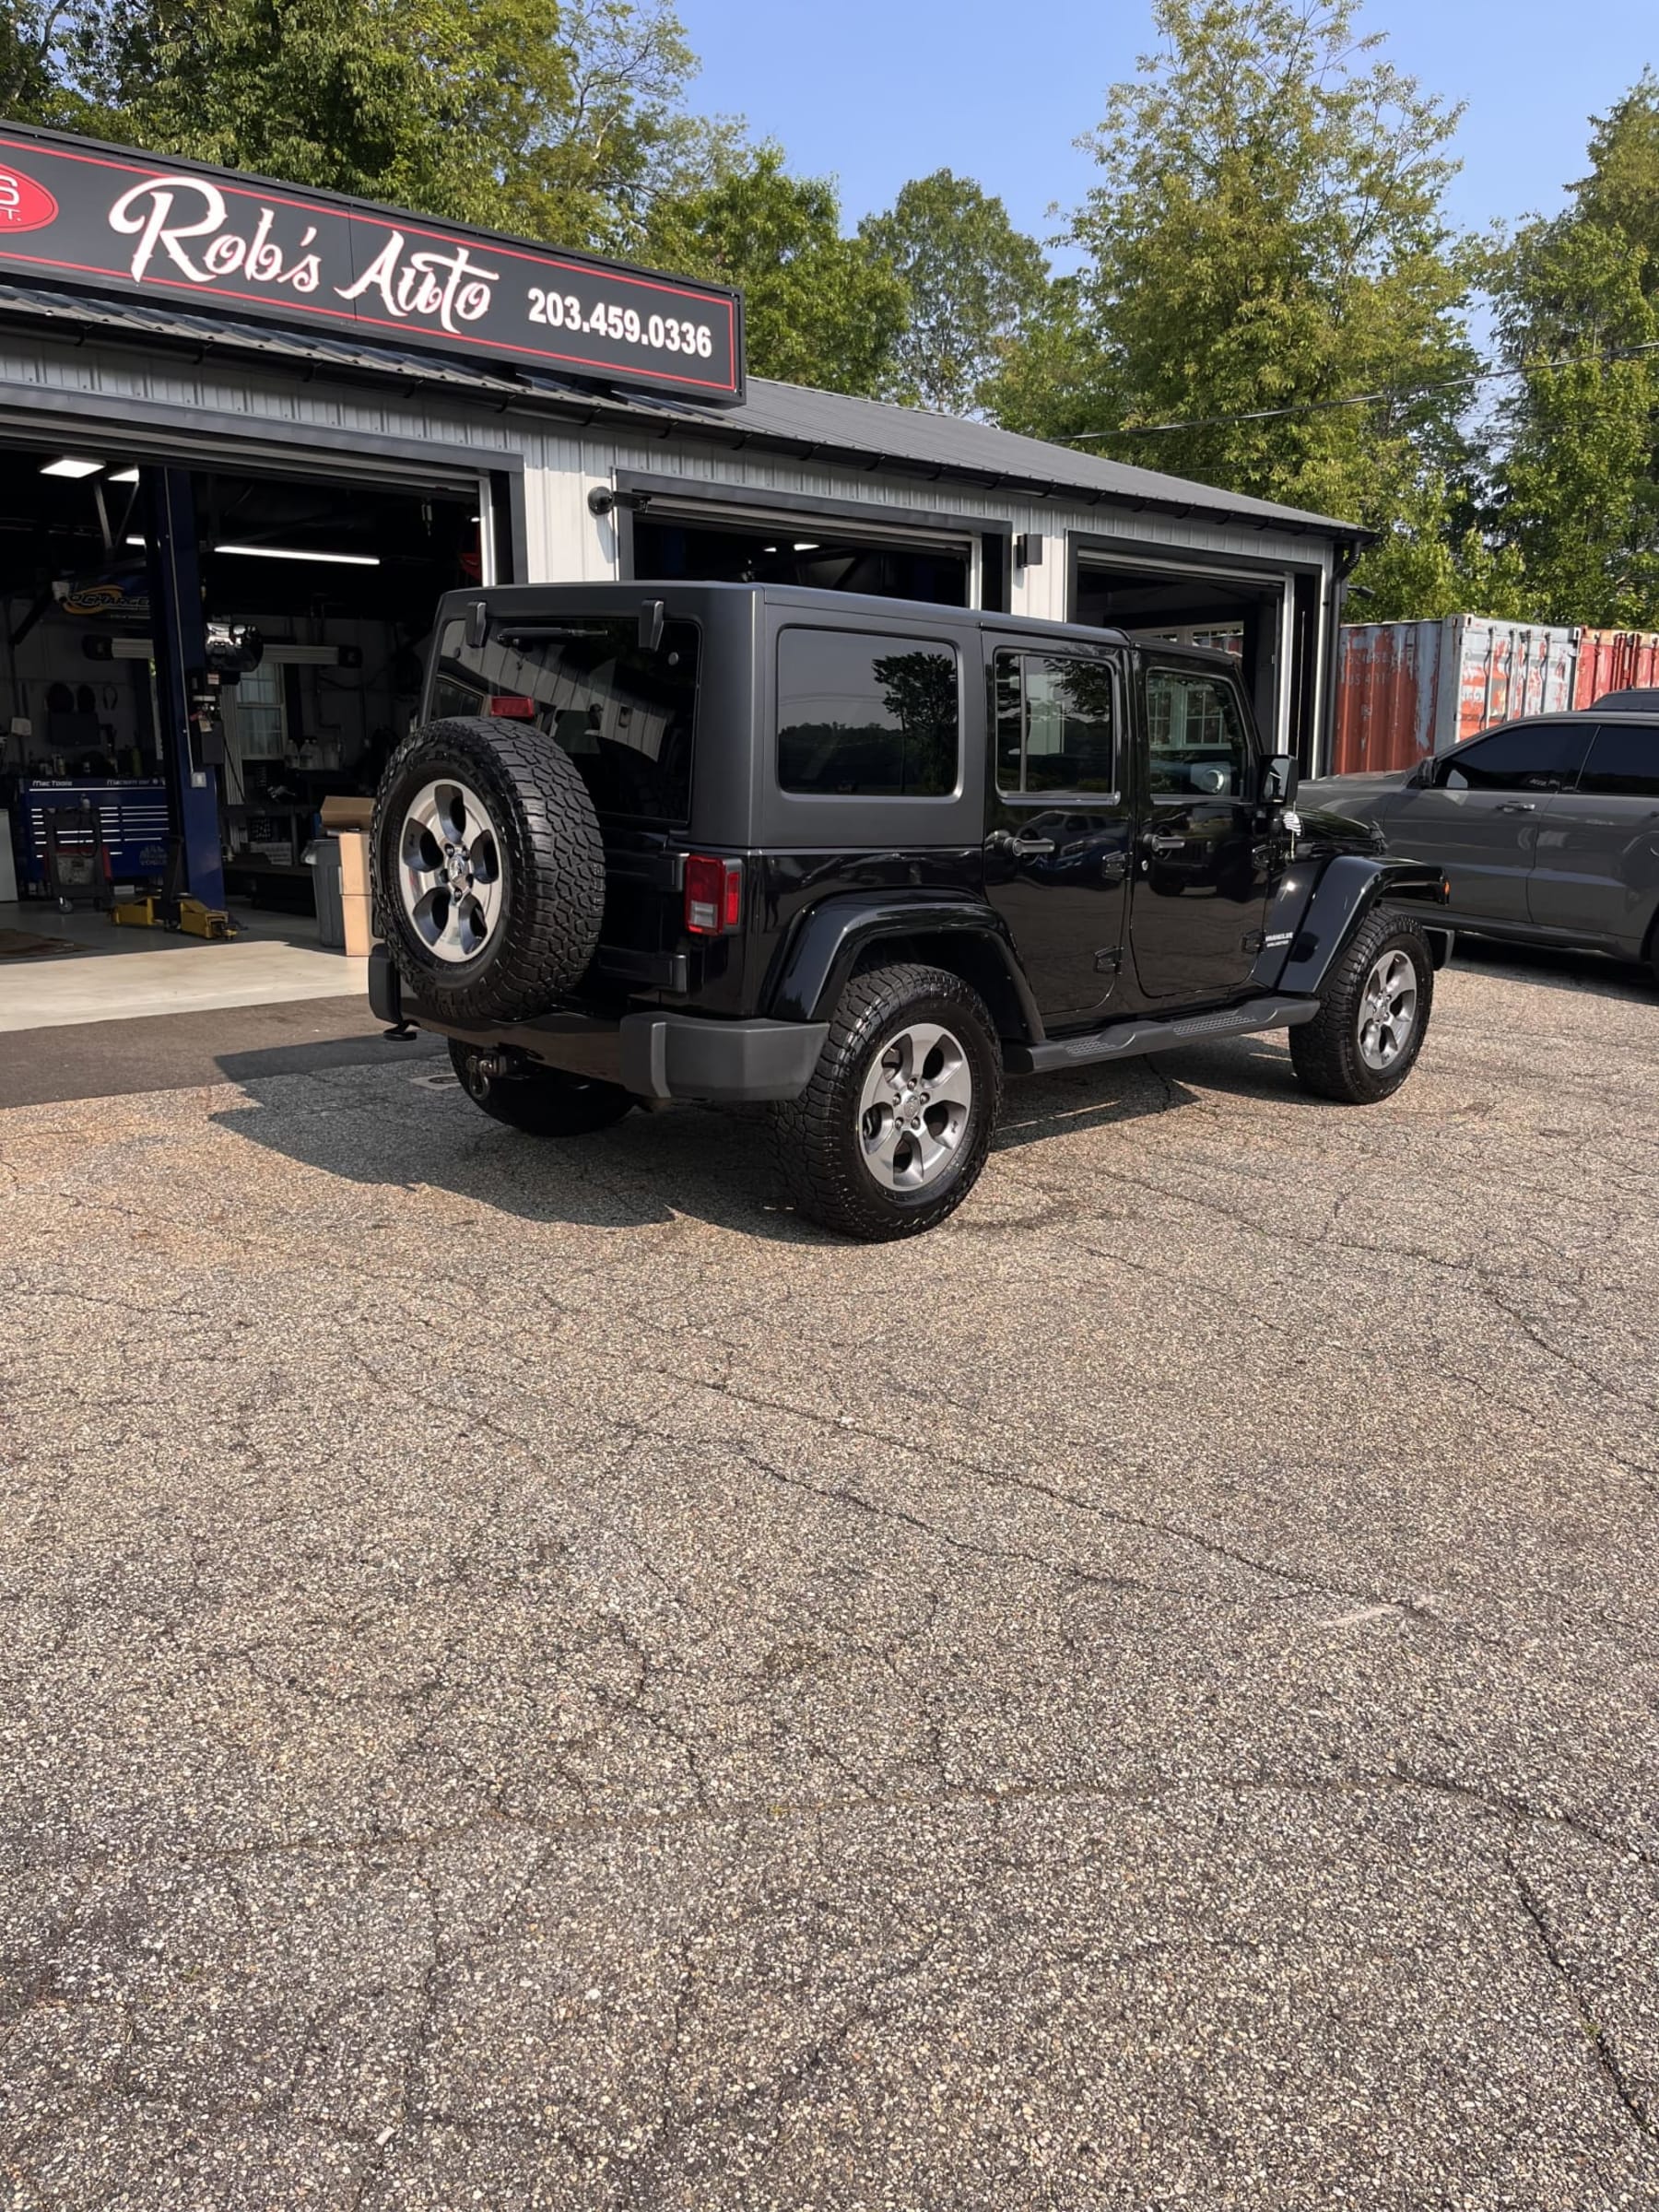 New Arrival!! 2017 Jeep Wrangler Unlimited Sahara!! Clean carfax! No Accidents, runs and drives like new! Fresh trade-in!! Freedom Hardtop, Bikini top, Bluetooth and much more! Priced $2000 under retail! Just hit 100k miles! Only $24,900!!